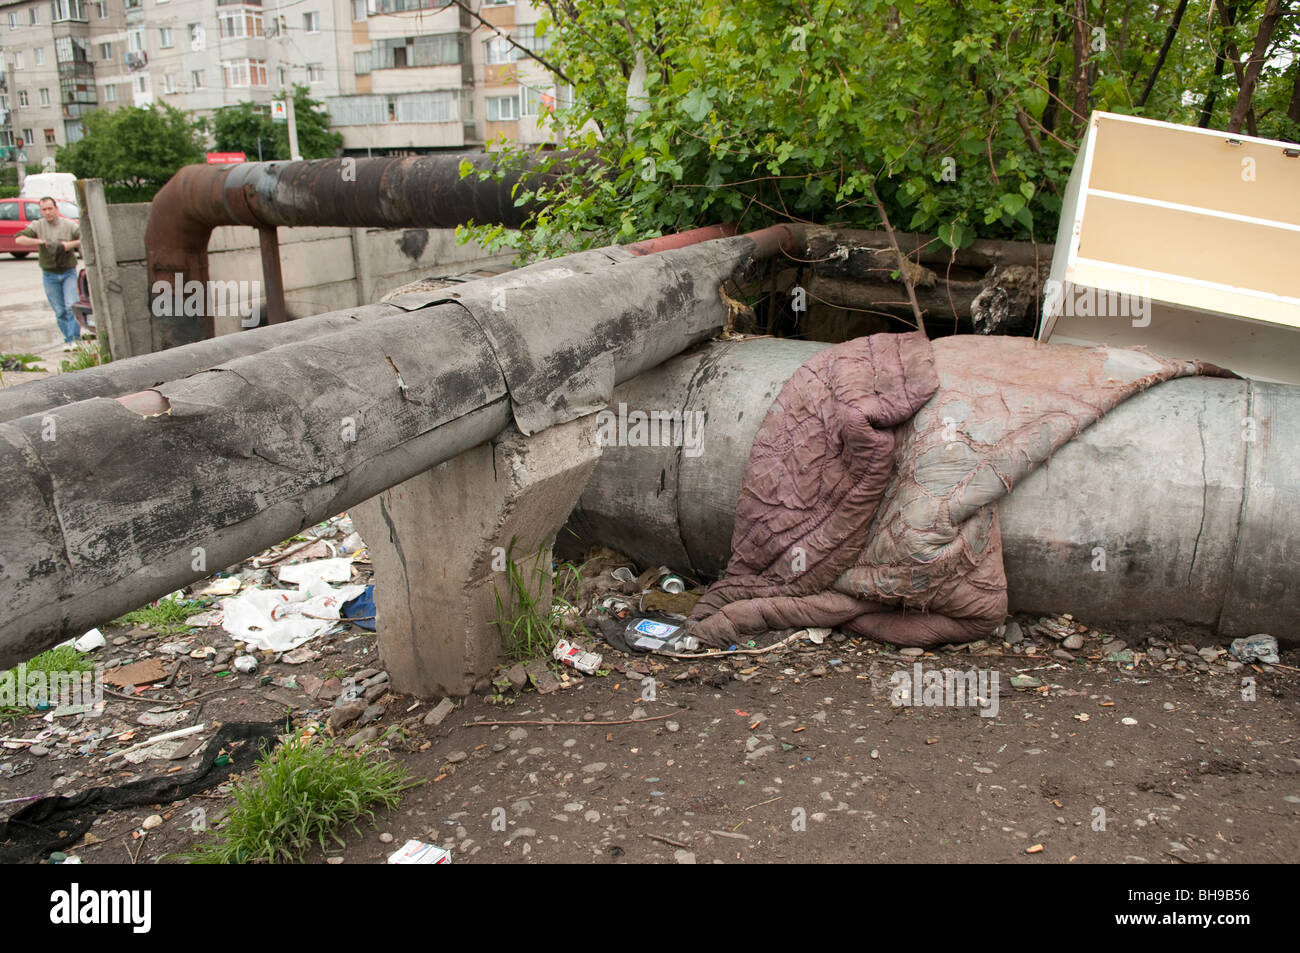 Steam pipes to heat city with Asbestos cladding where homeless people live Ploiesti Romania Eastern Europe Stock Photo